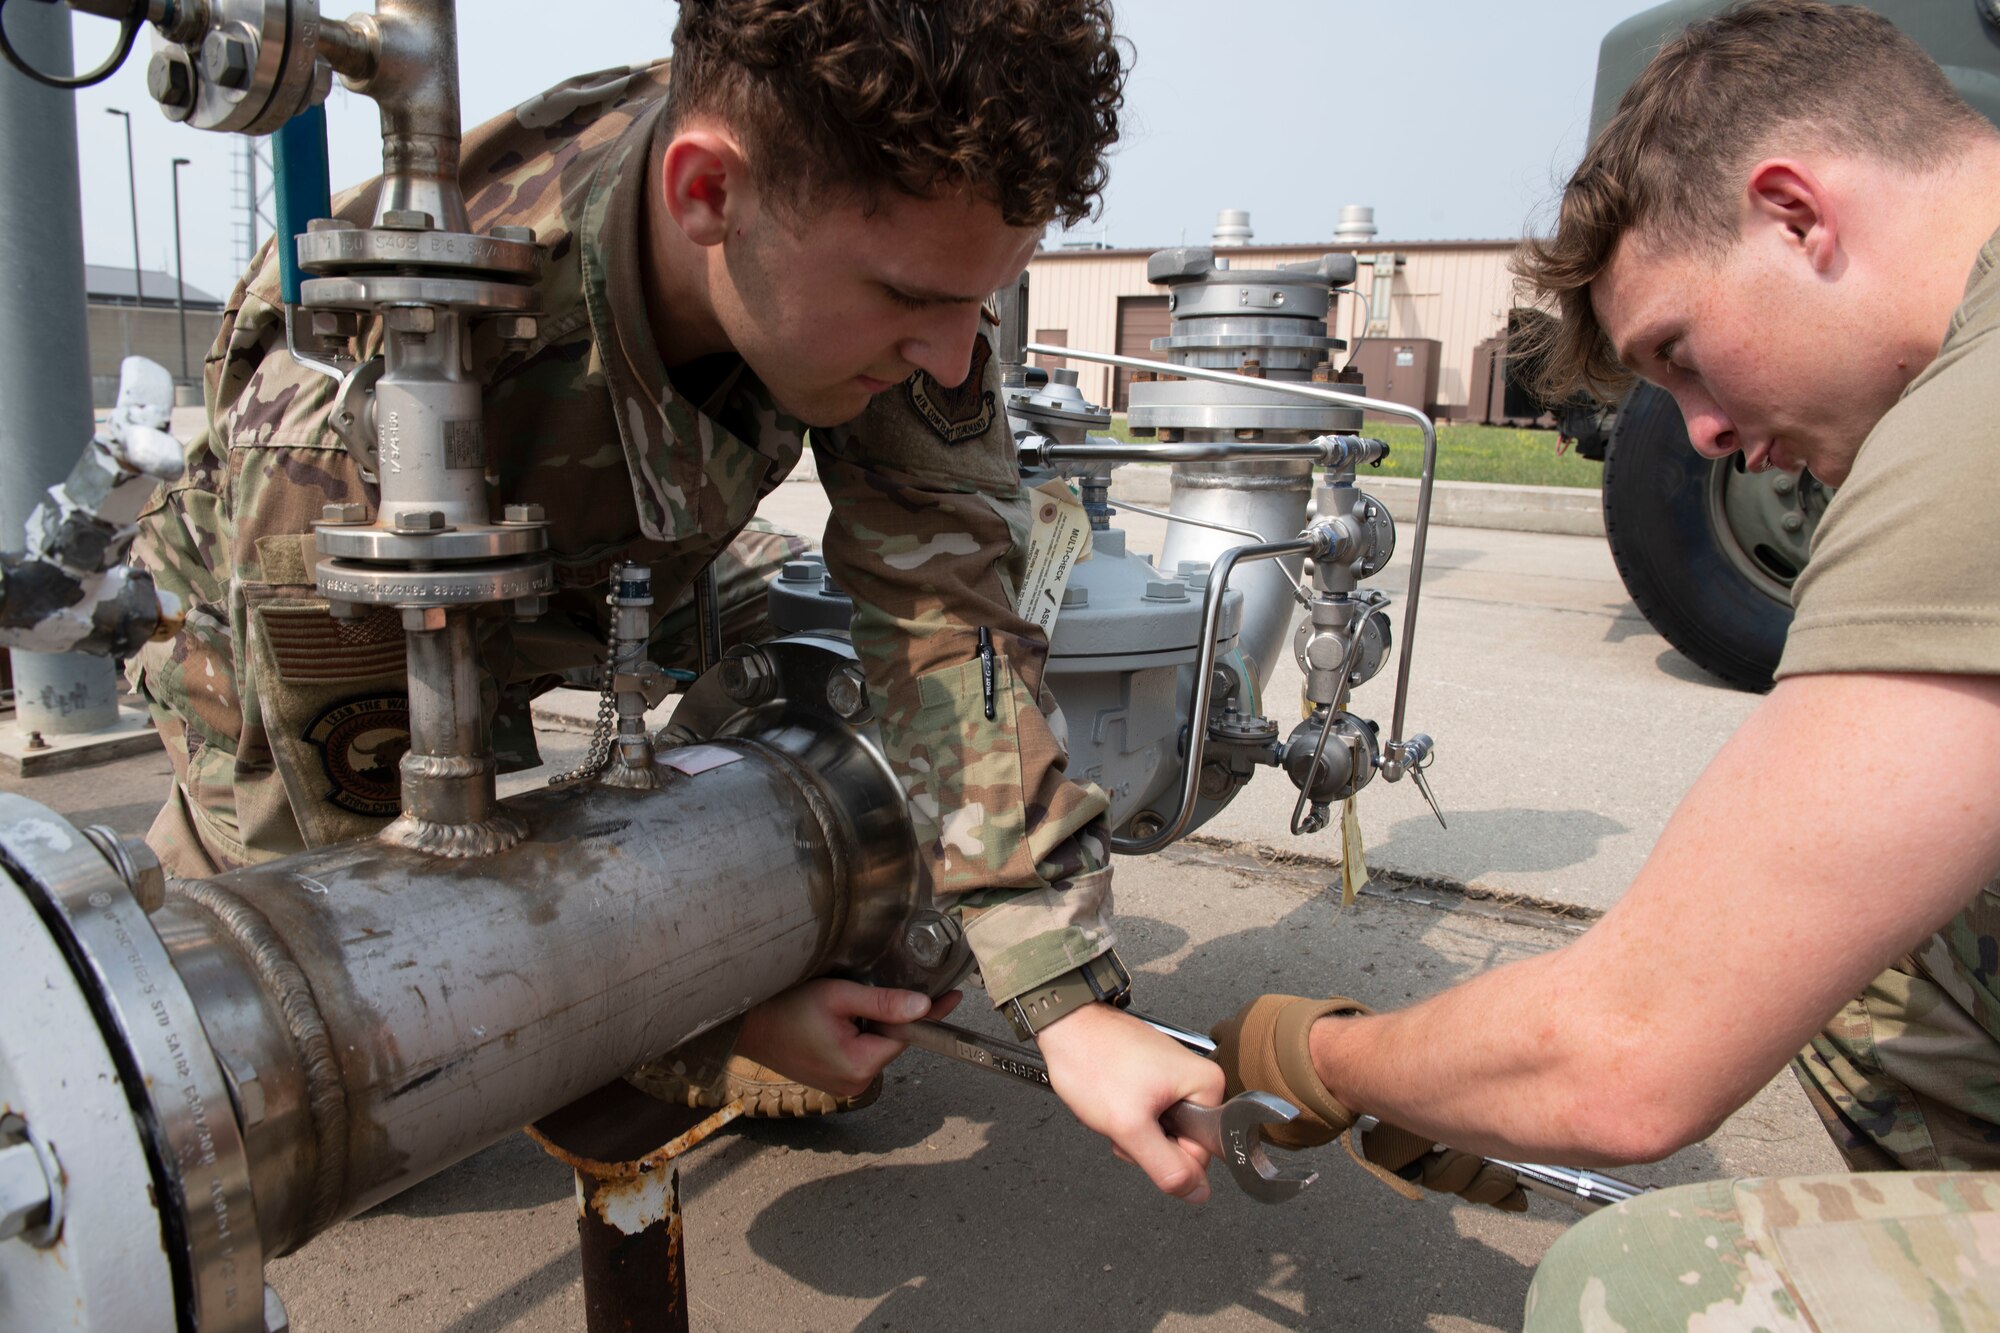 2 service members work on a hydrant fuel pipe.